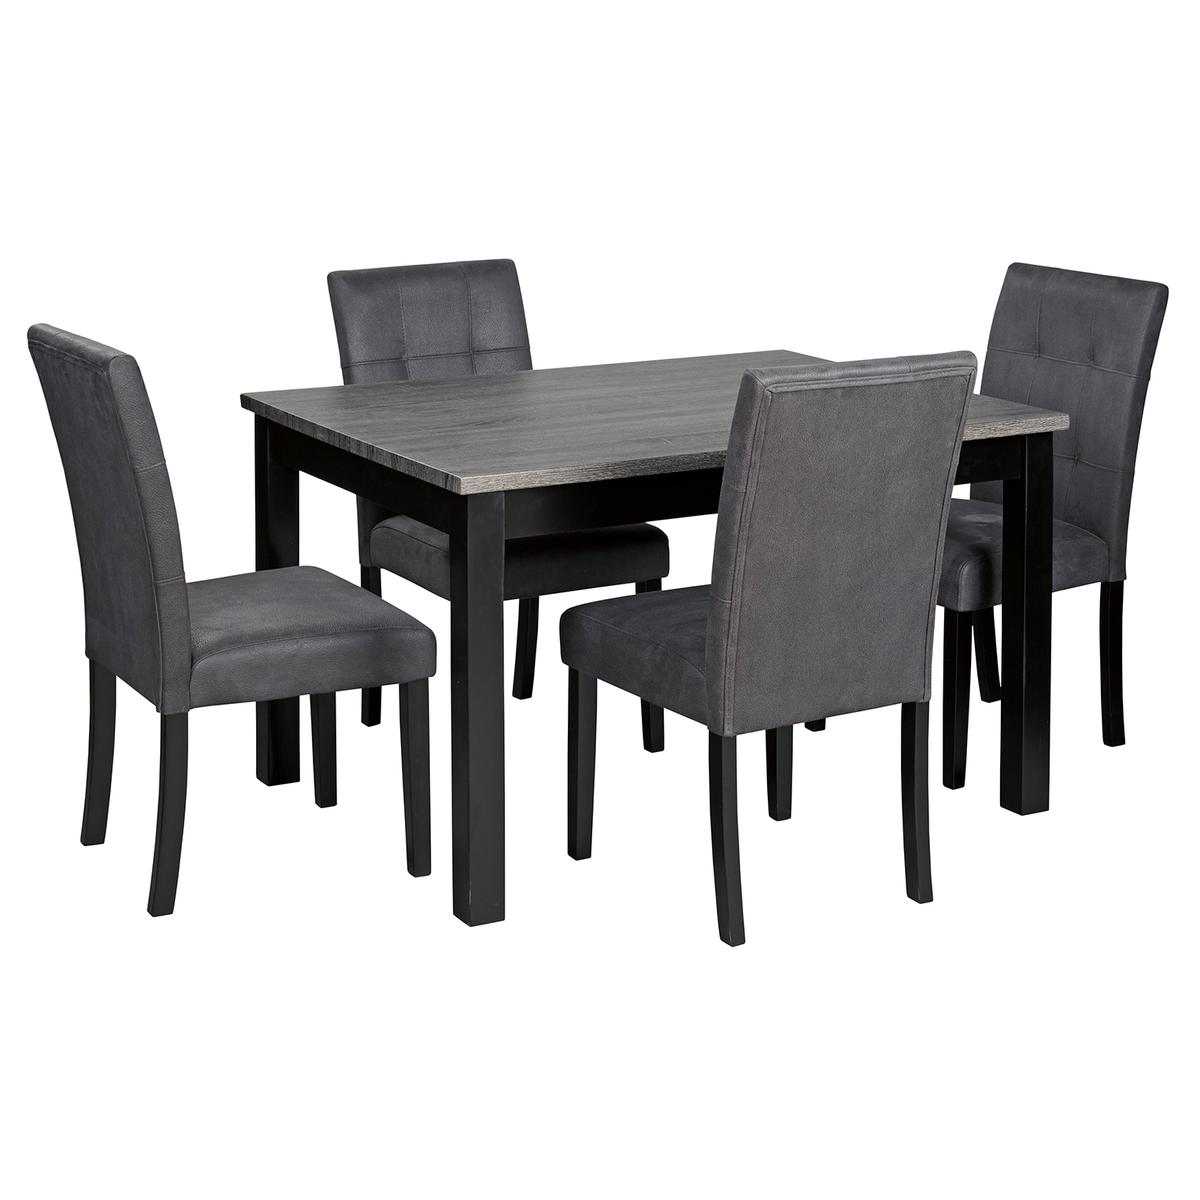 Ashley Garvine Dining Table & 4 Chairs (5 Piece Set)